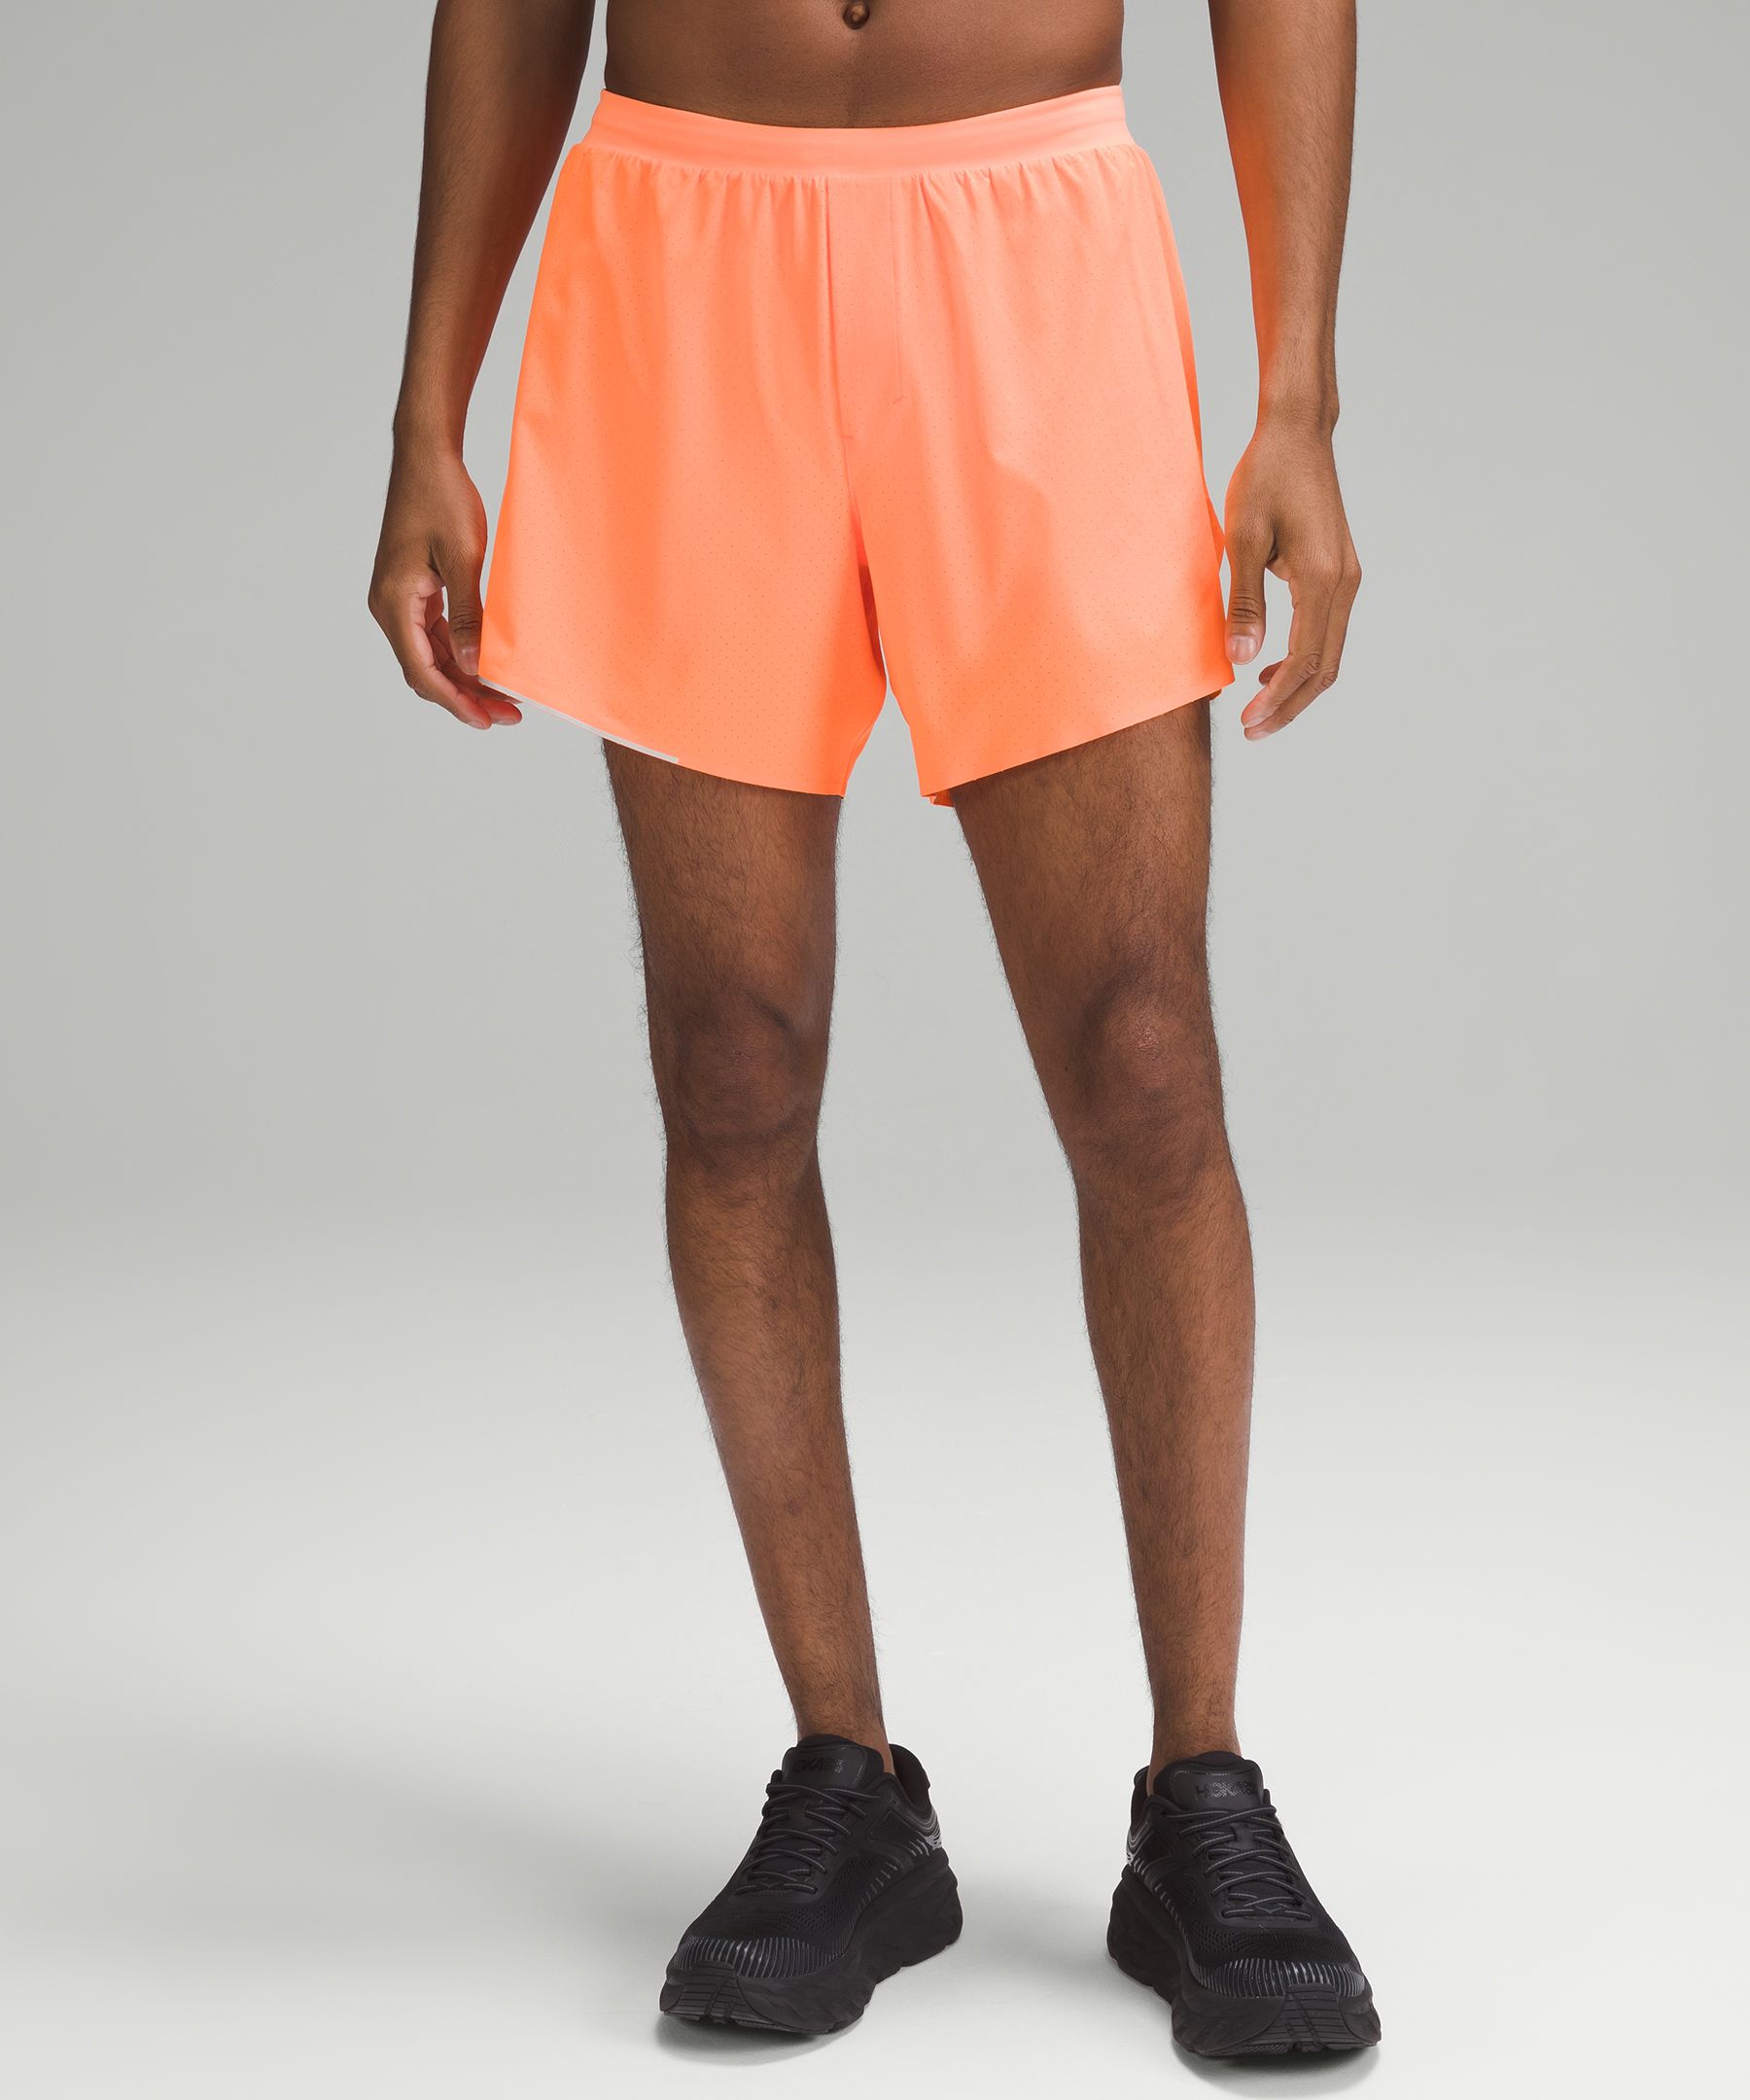 Lululemon Fast And Free Lined Short 6" In Highlight Orange